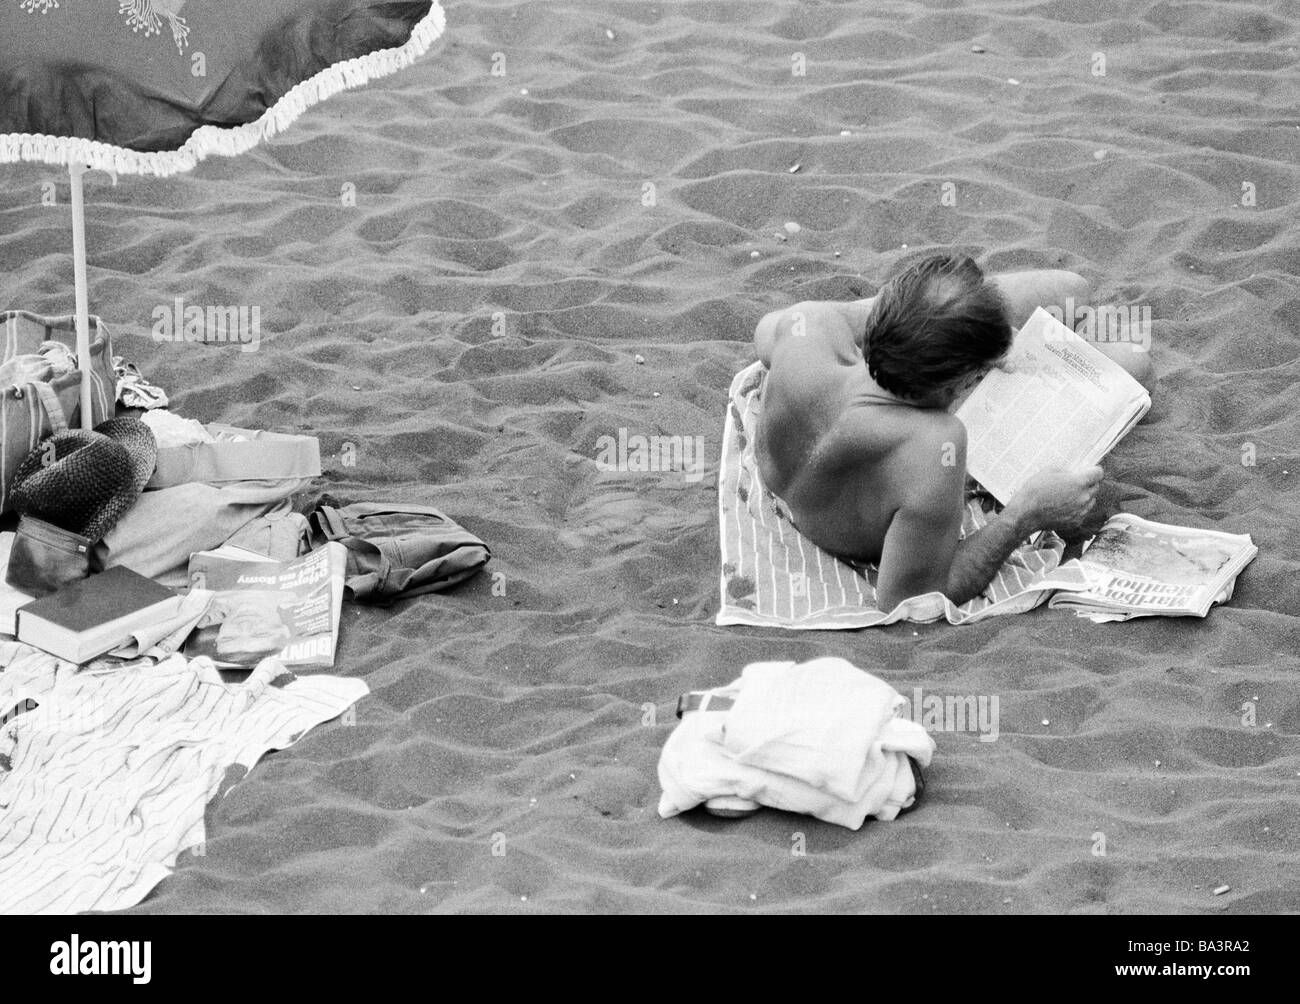 Eighties, black and white photo, holidays, tourism, man lies on the beach and reads a newspaper, Spain, Canary Islands, Canaries, Tenerife, Puerto de la Cruz Stock Photo